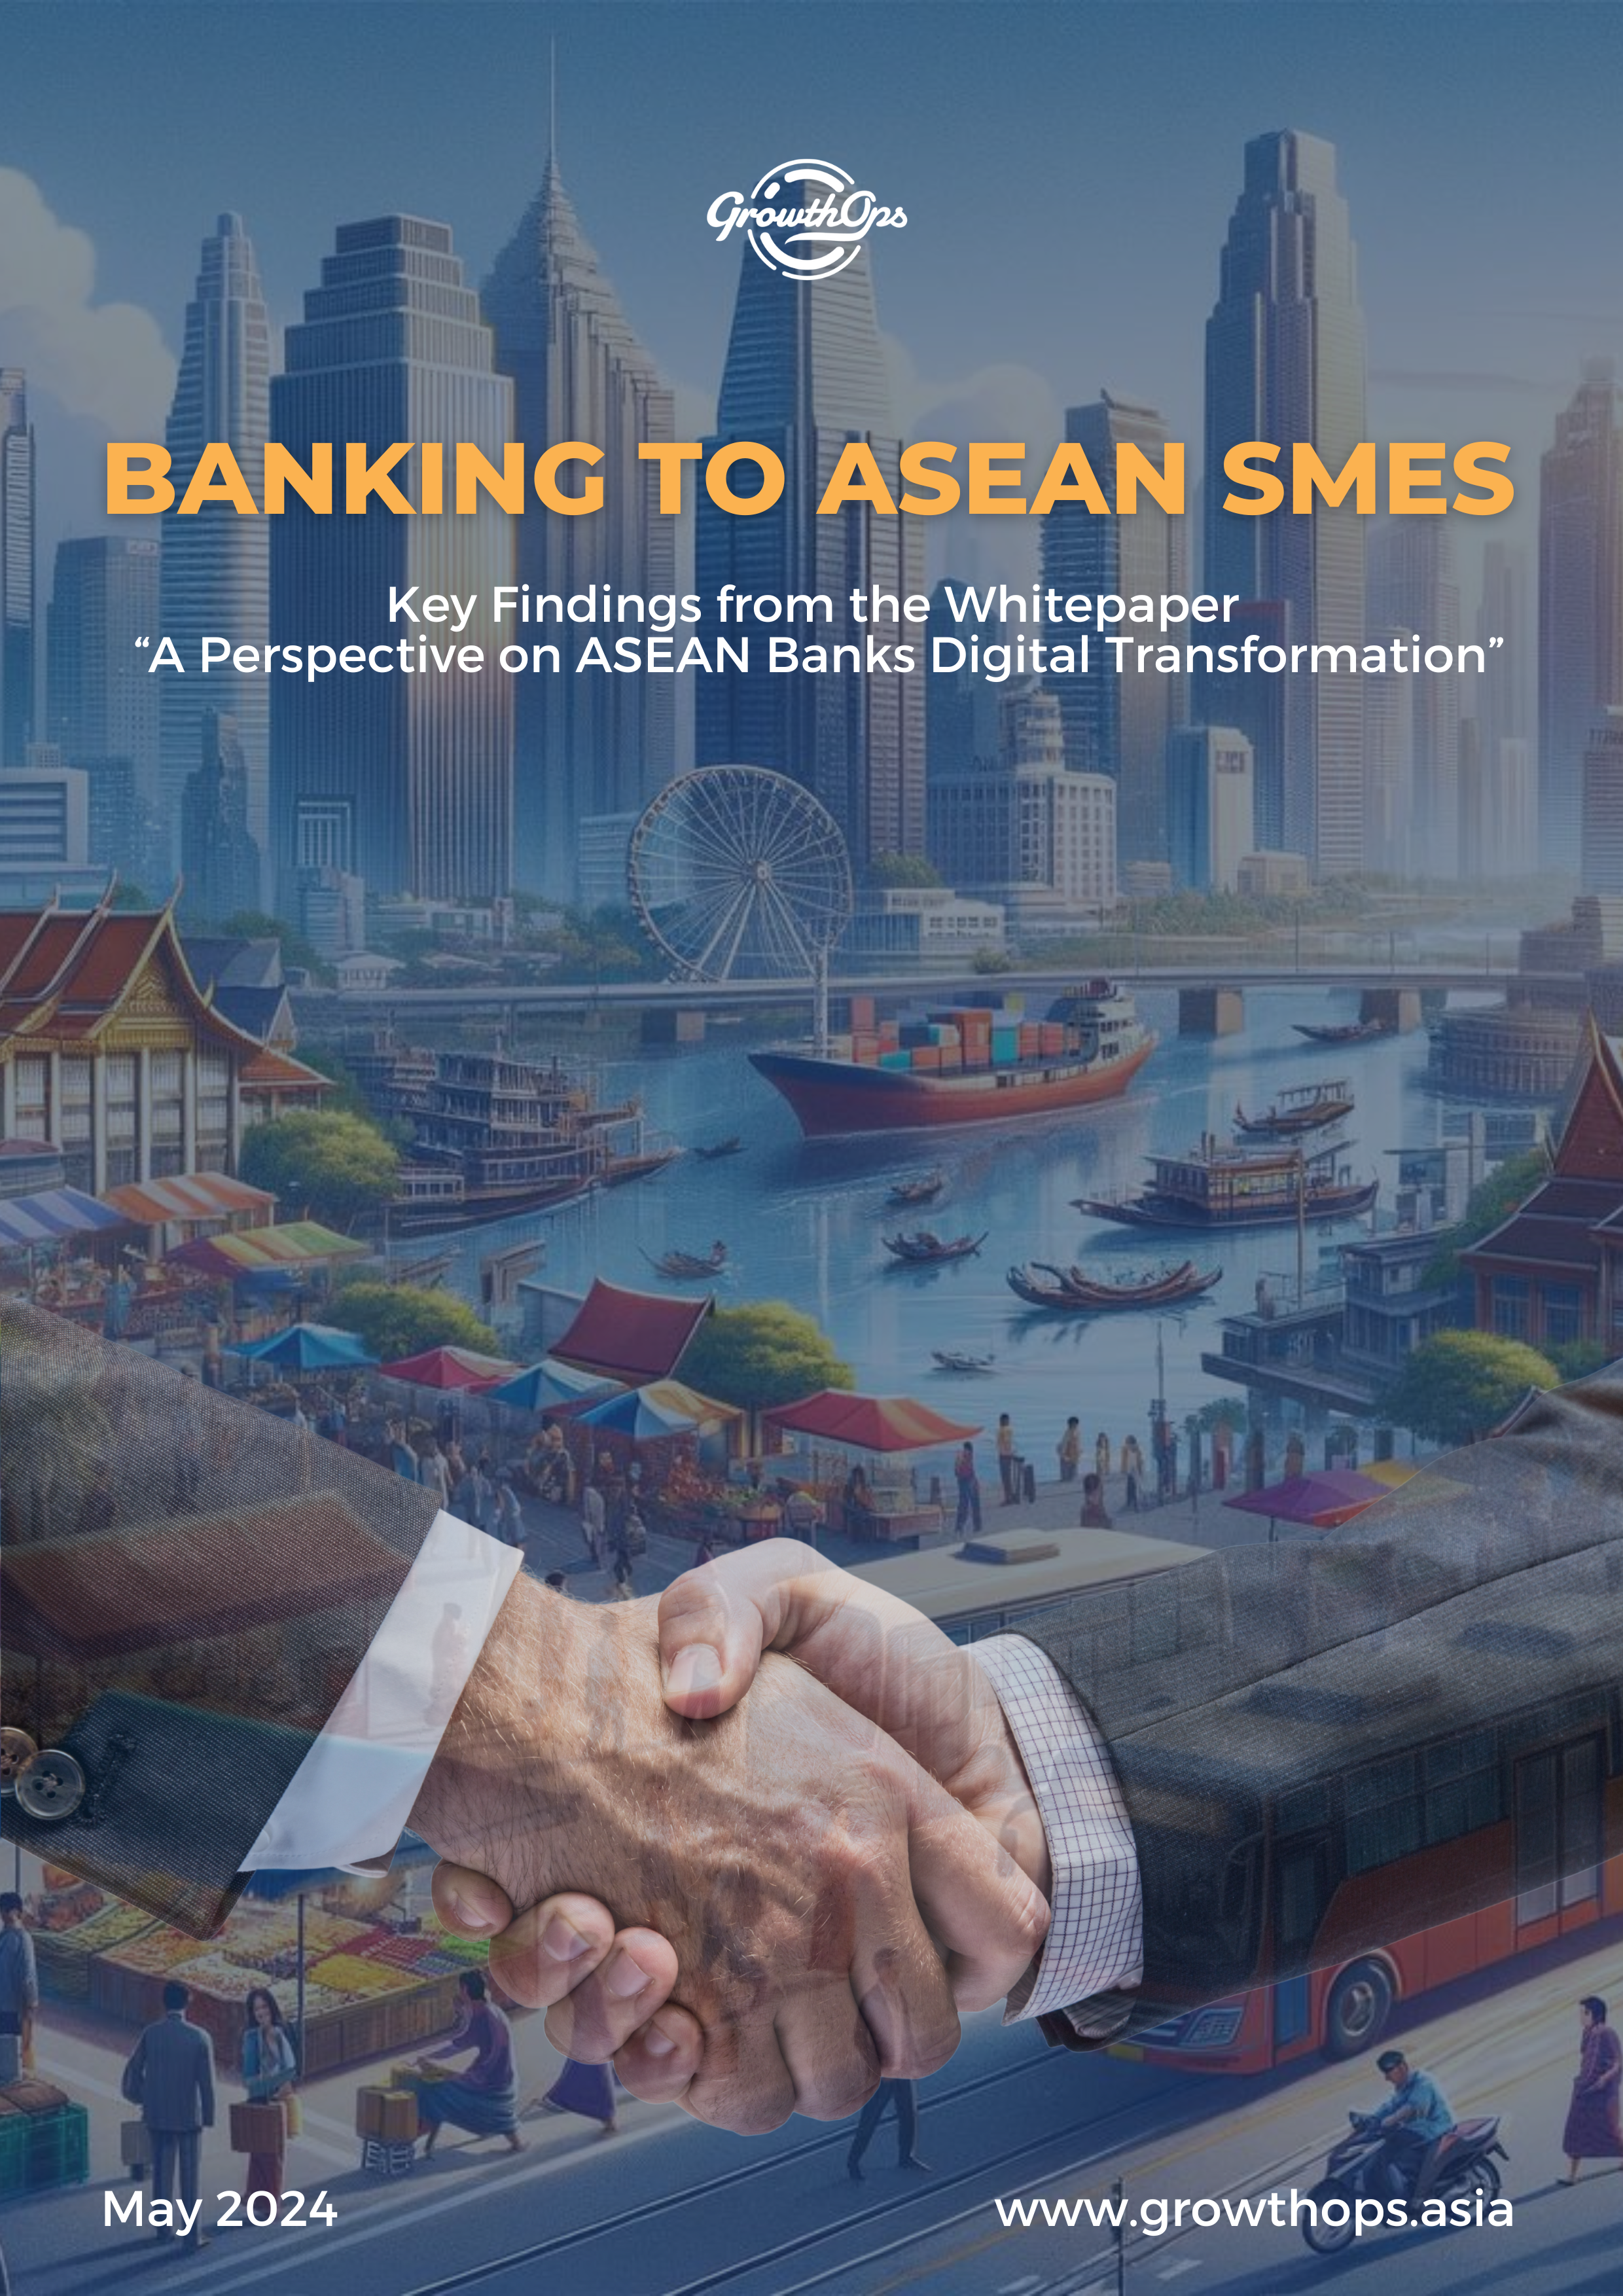 Banking to ASEAN SMEs by GrowthOps Asia